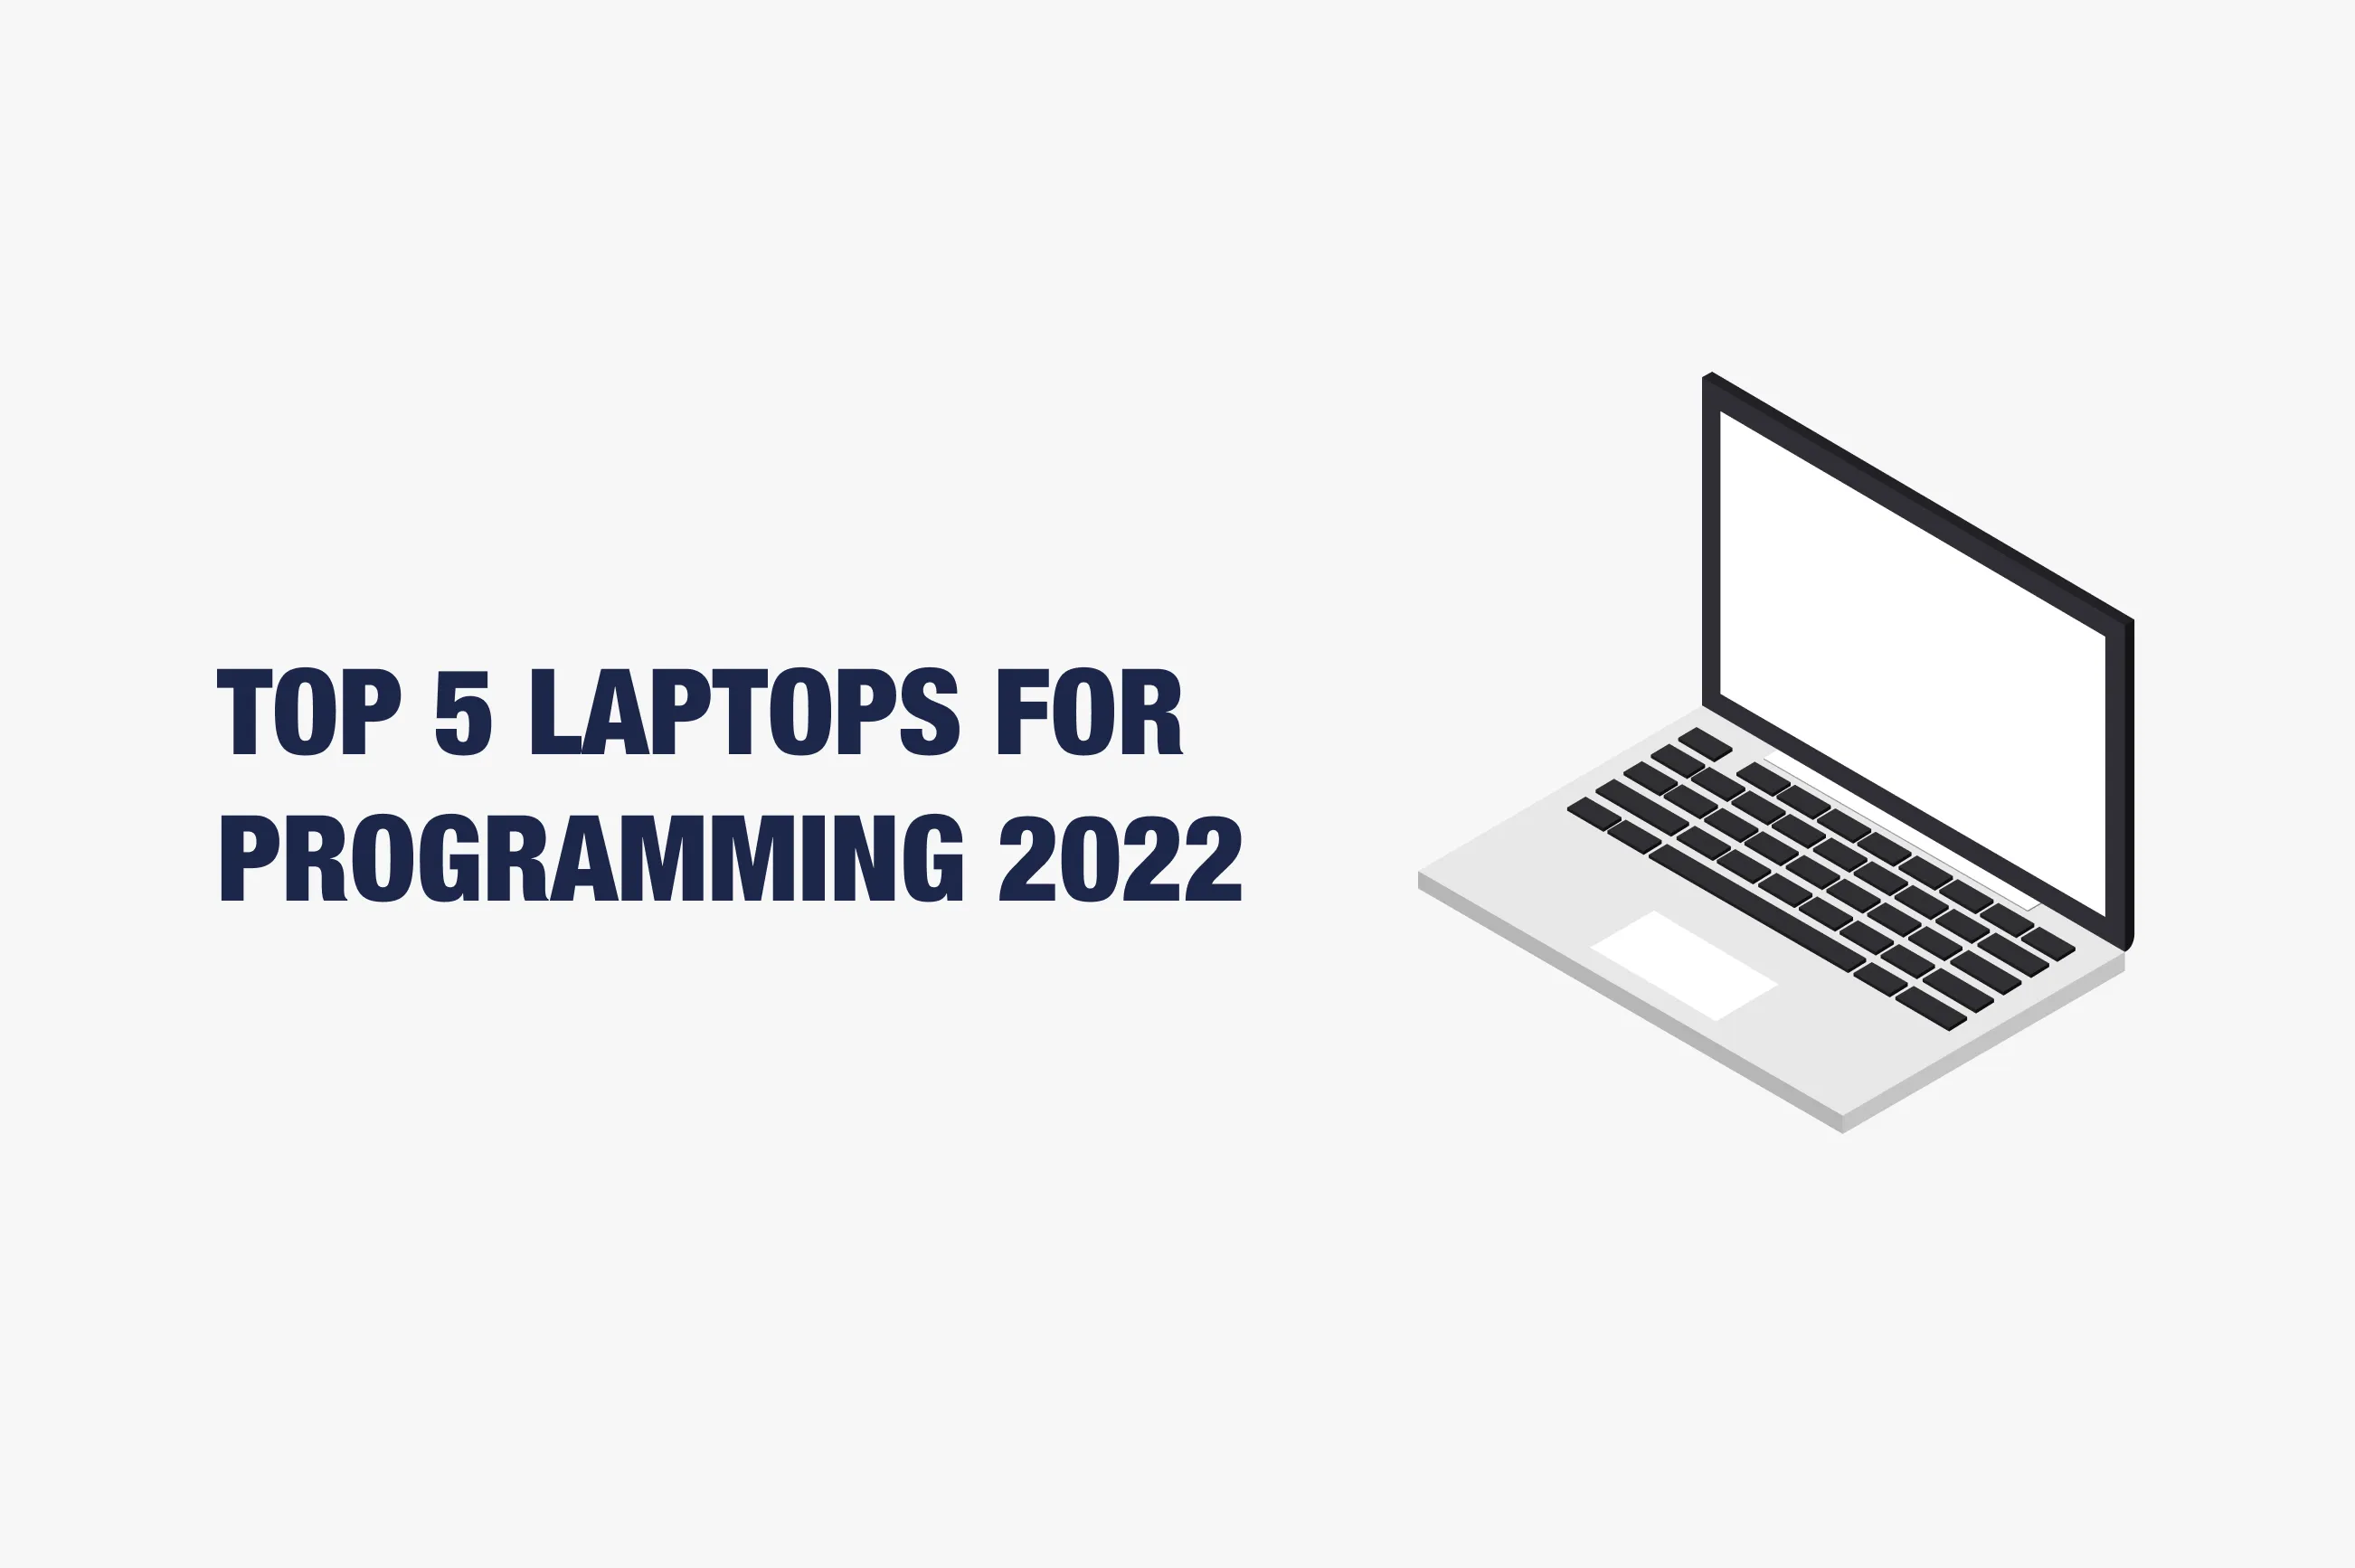 What are the Advantages of a Laptop Over a PC?